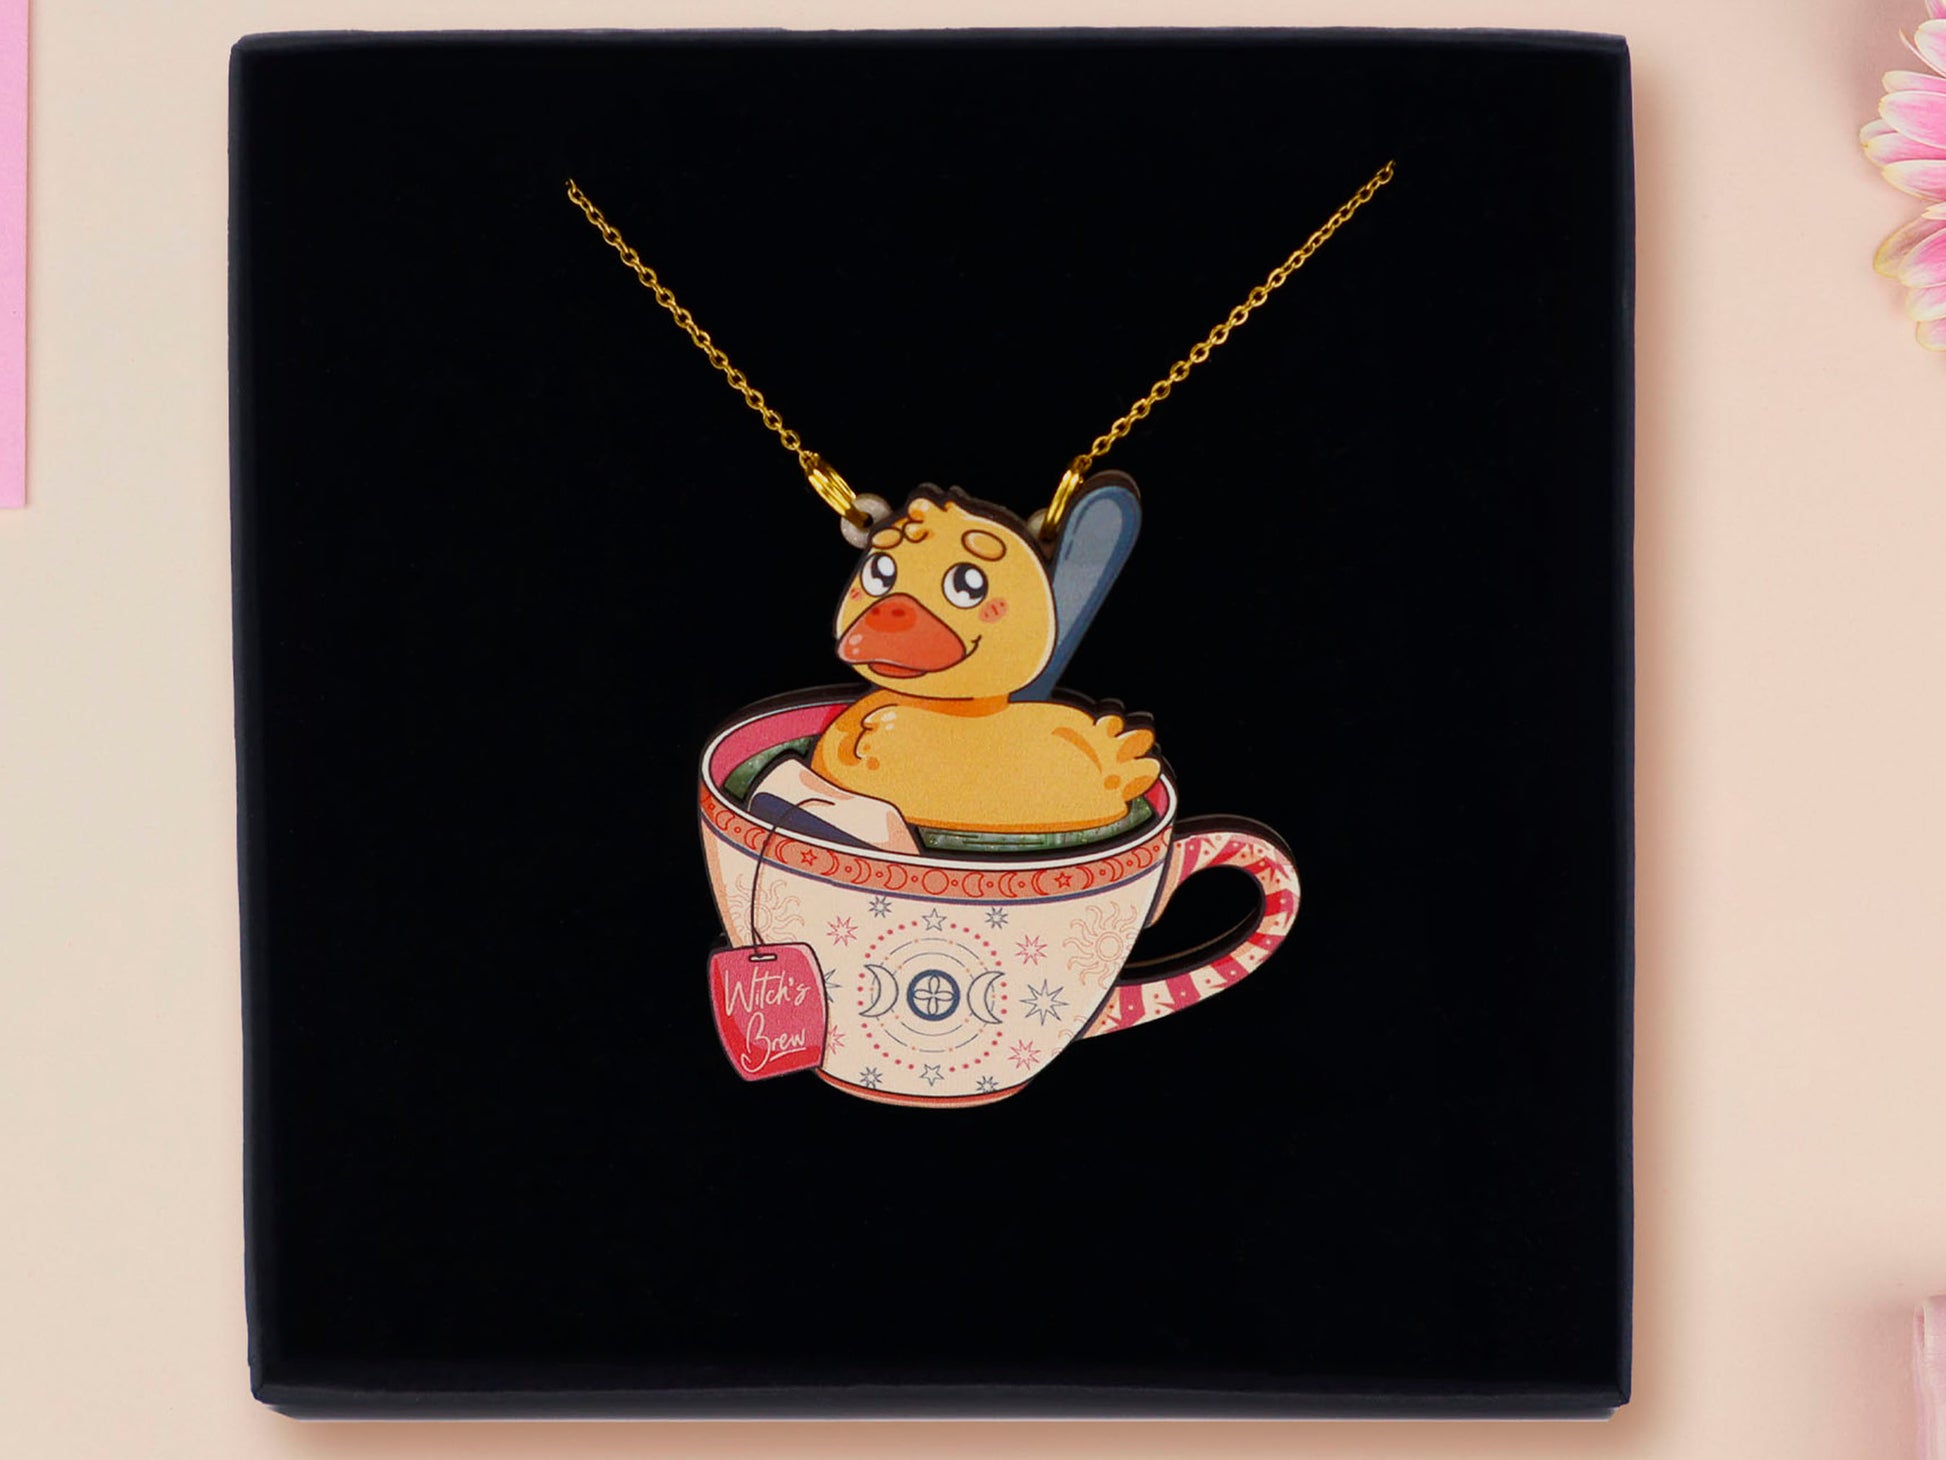 Mixed material handmade necklace of chibi cartoon duck sat in a pearlescent witch's brew teacup, with a gold chain and black gift box.